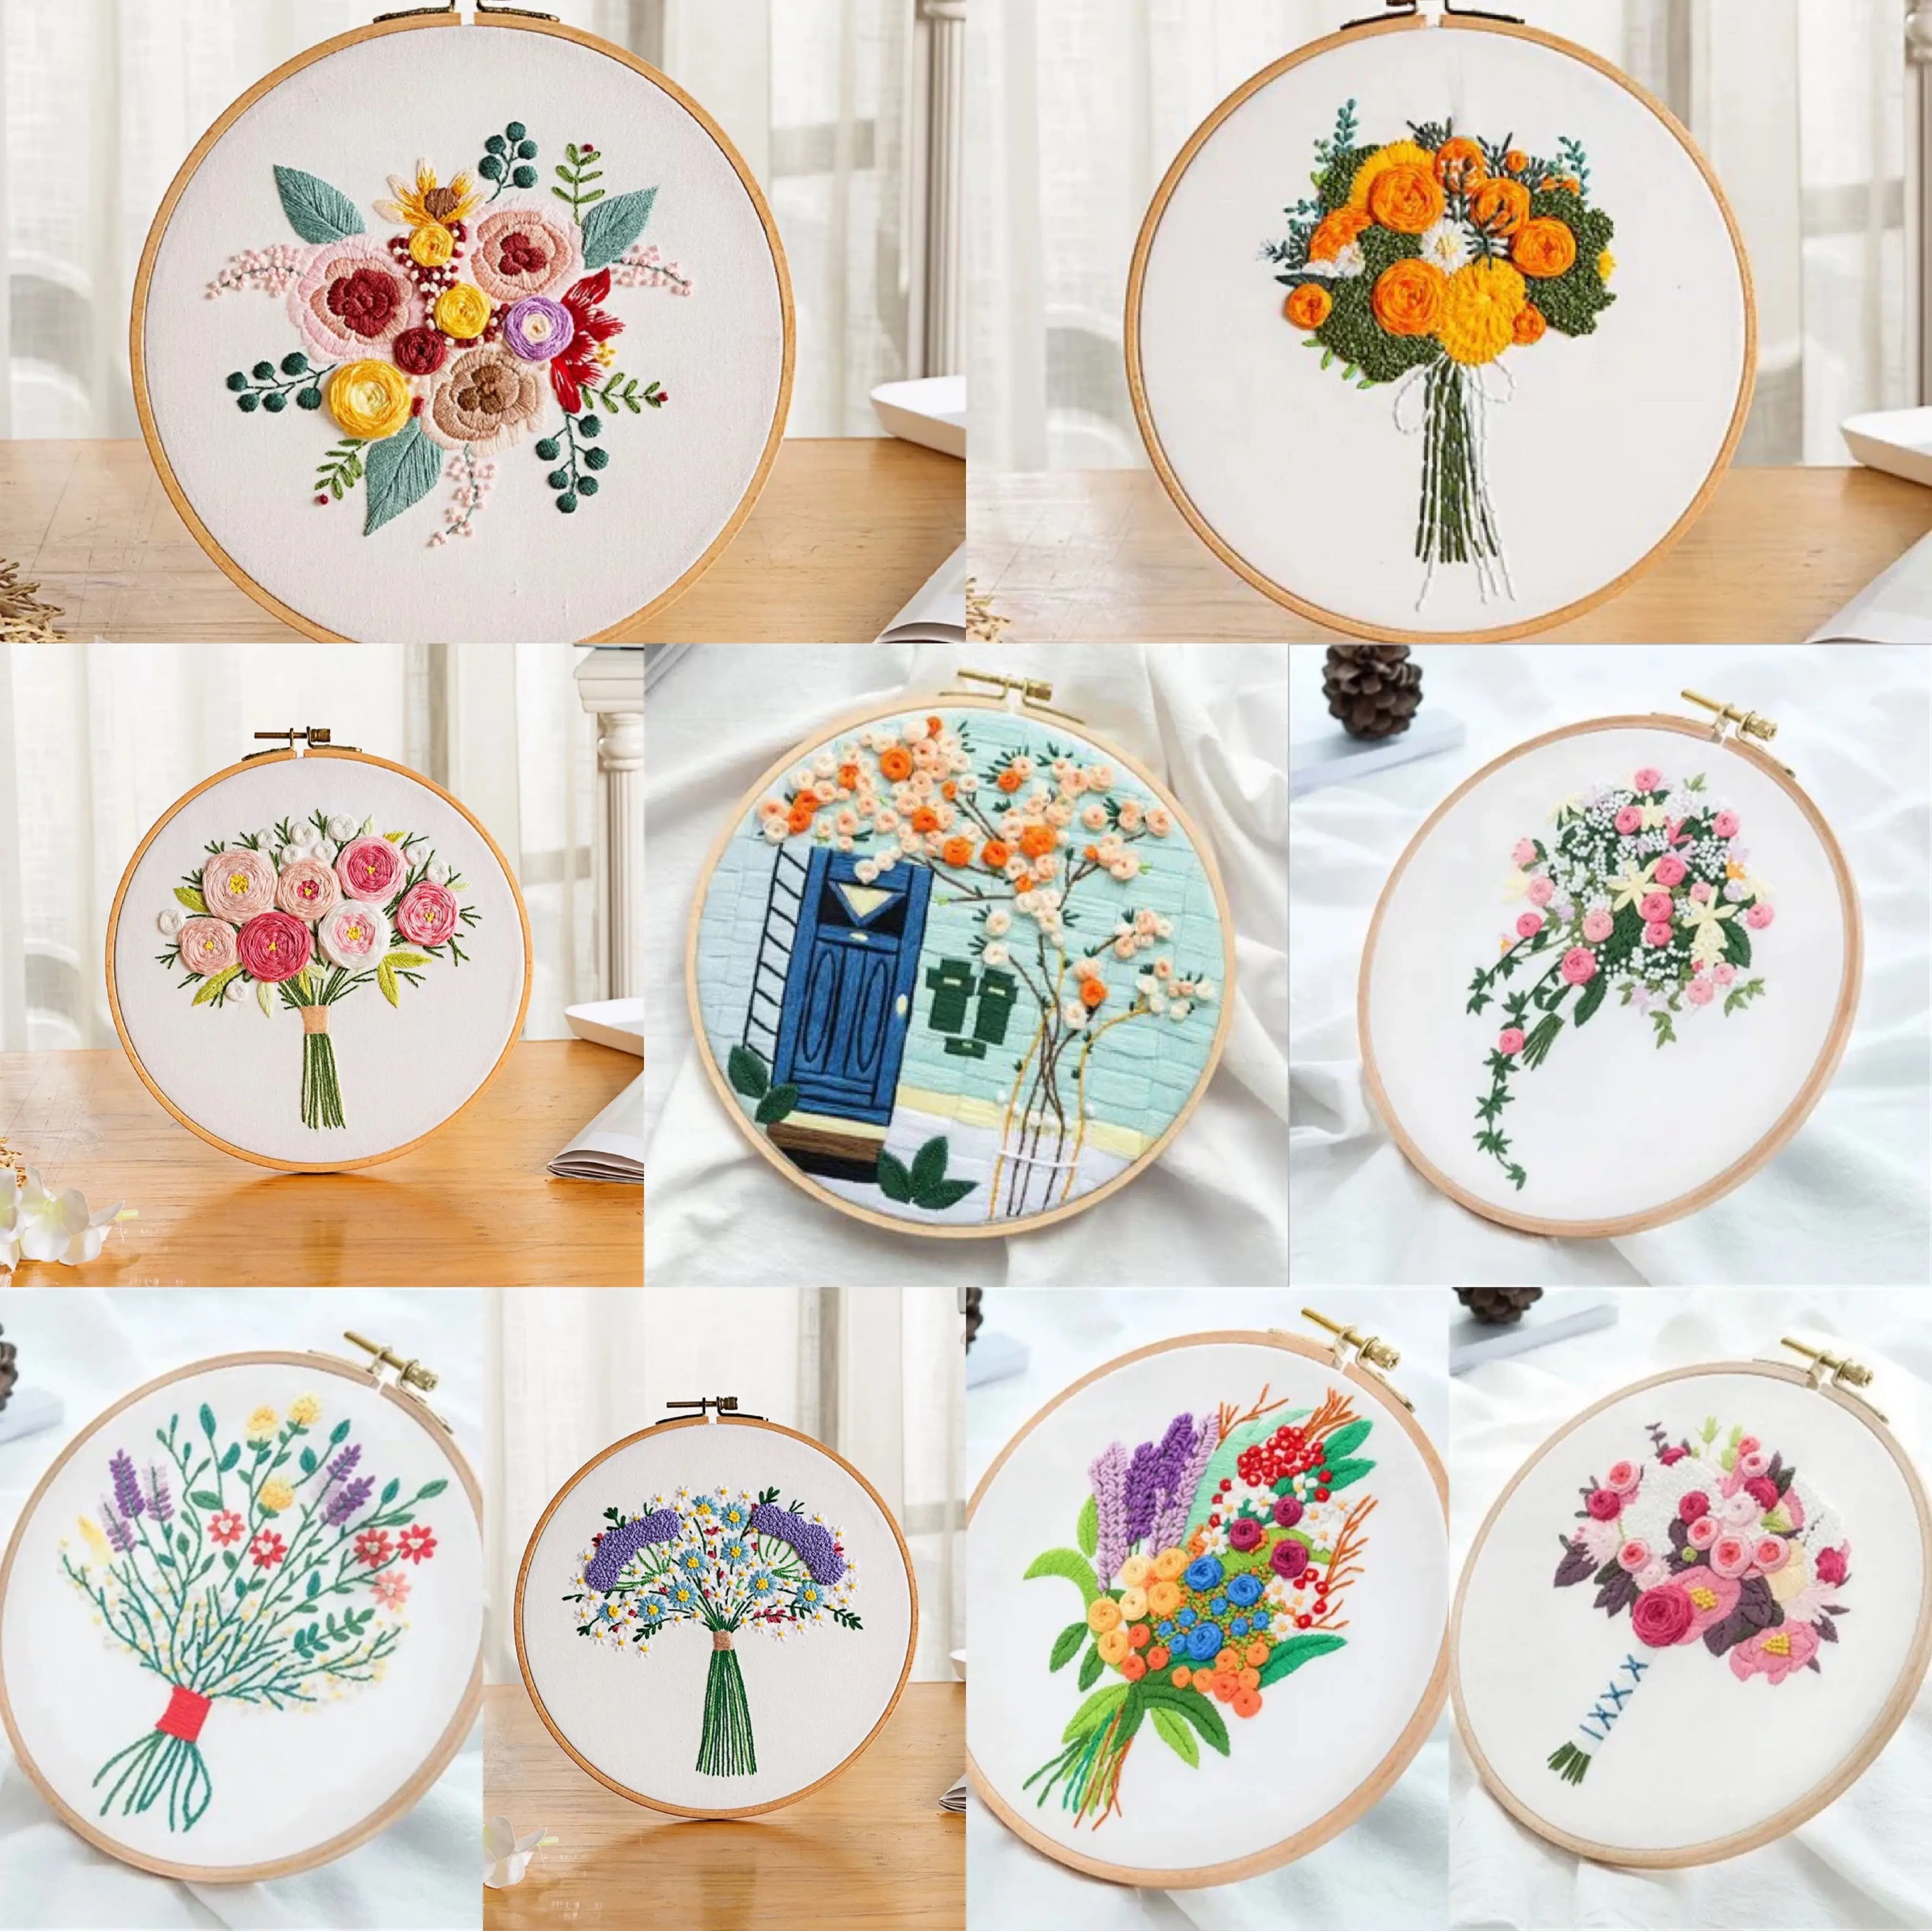 DIY Embroidery Kit Hoop Flower Plant Pattern Cross Stitch for Beginners  Hanging Handwork Needlework Crafts With Embroidery Frame - AliExpress